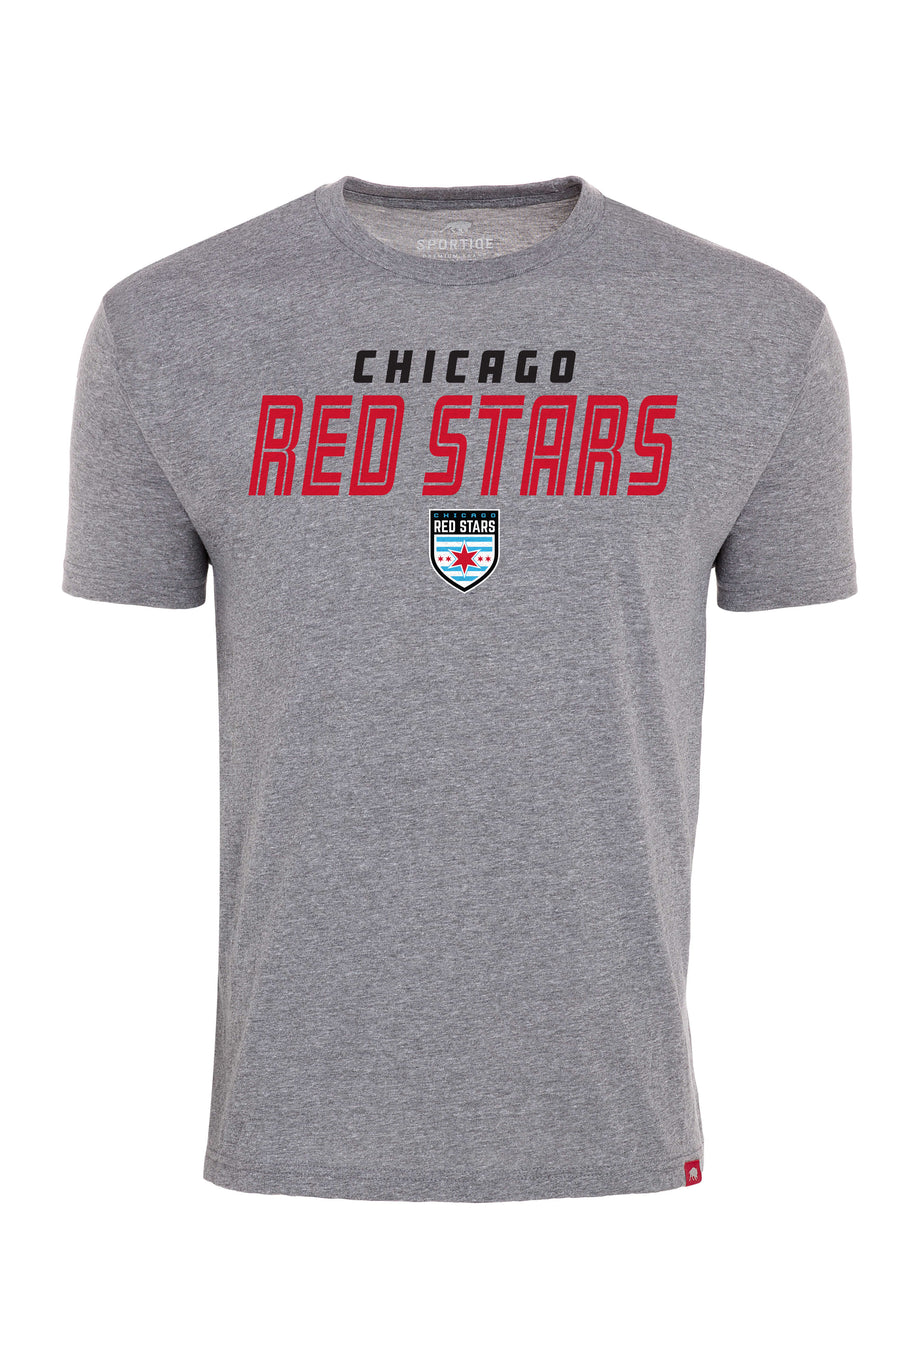 Chicago Red Stars Sportiqe Men's Gray Comfy Tee